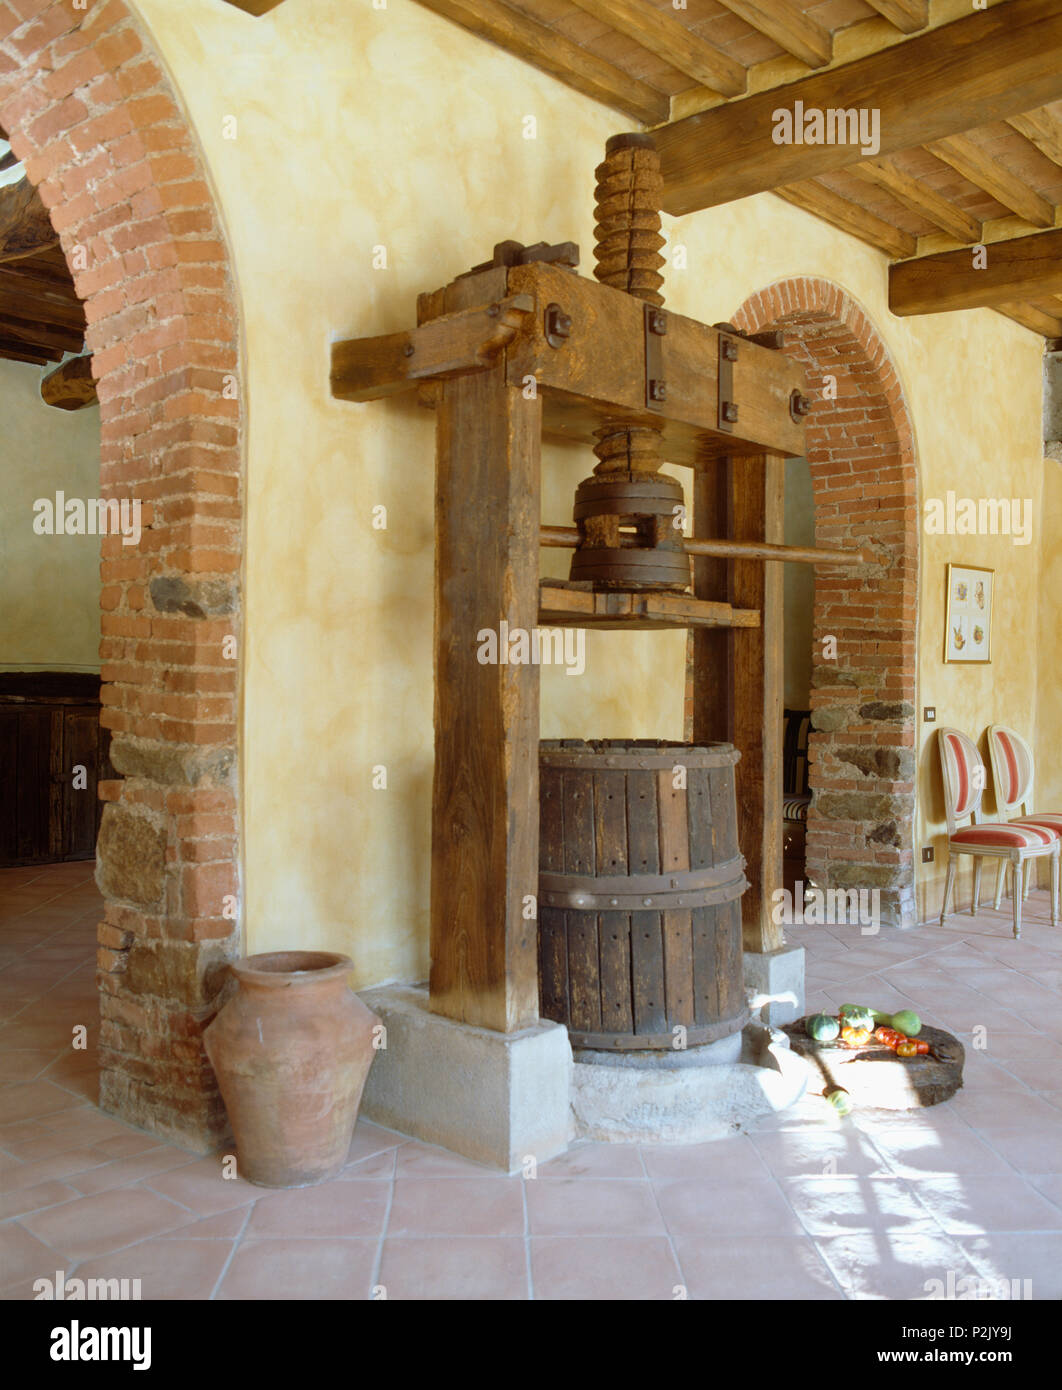 Large antique olive press and wooden barrel in Tuscan hall with tiled floor Stock Photo